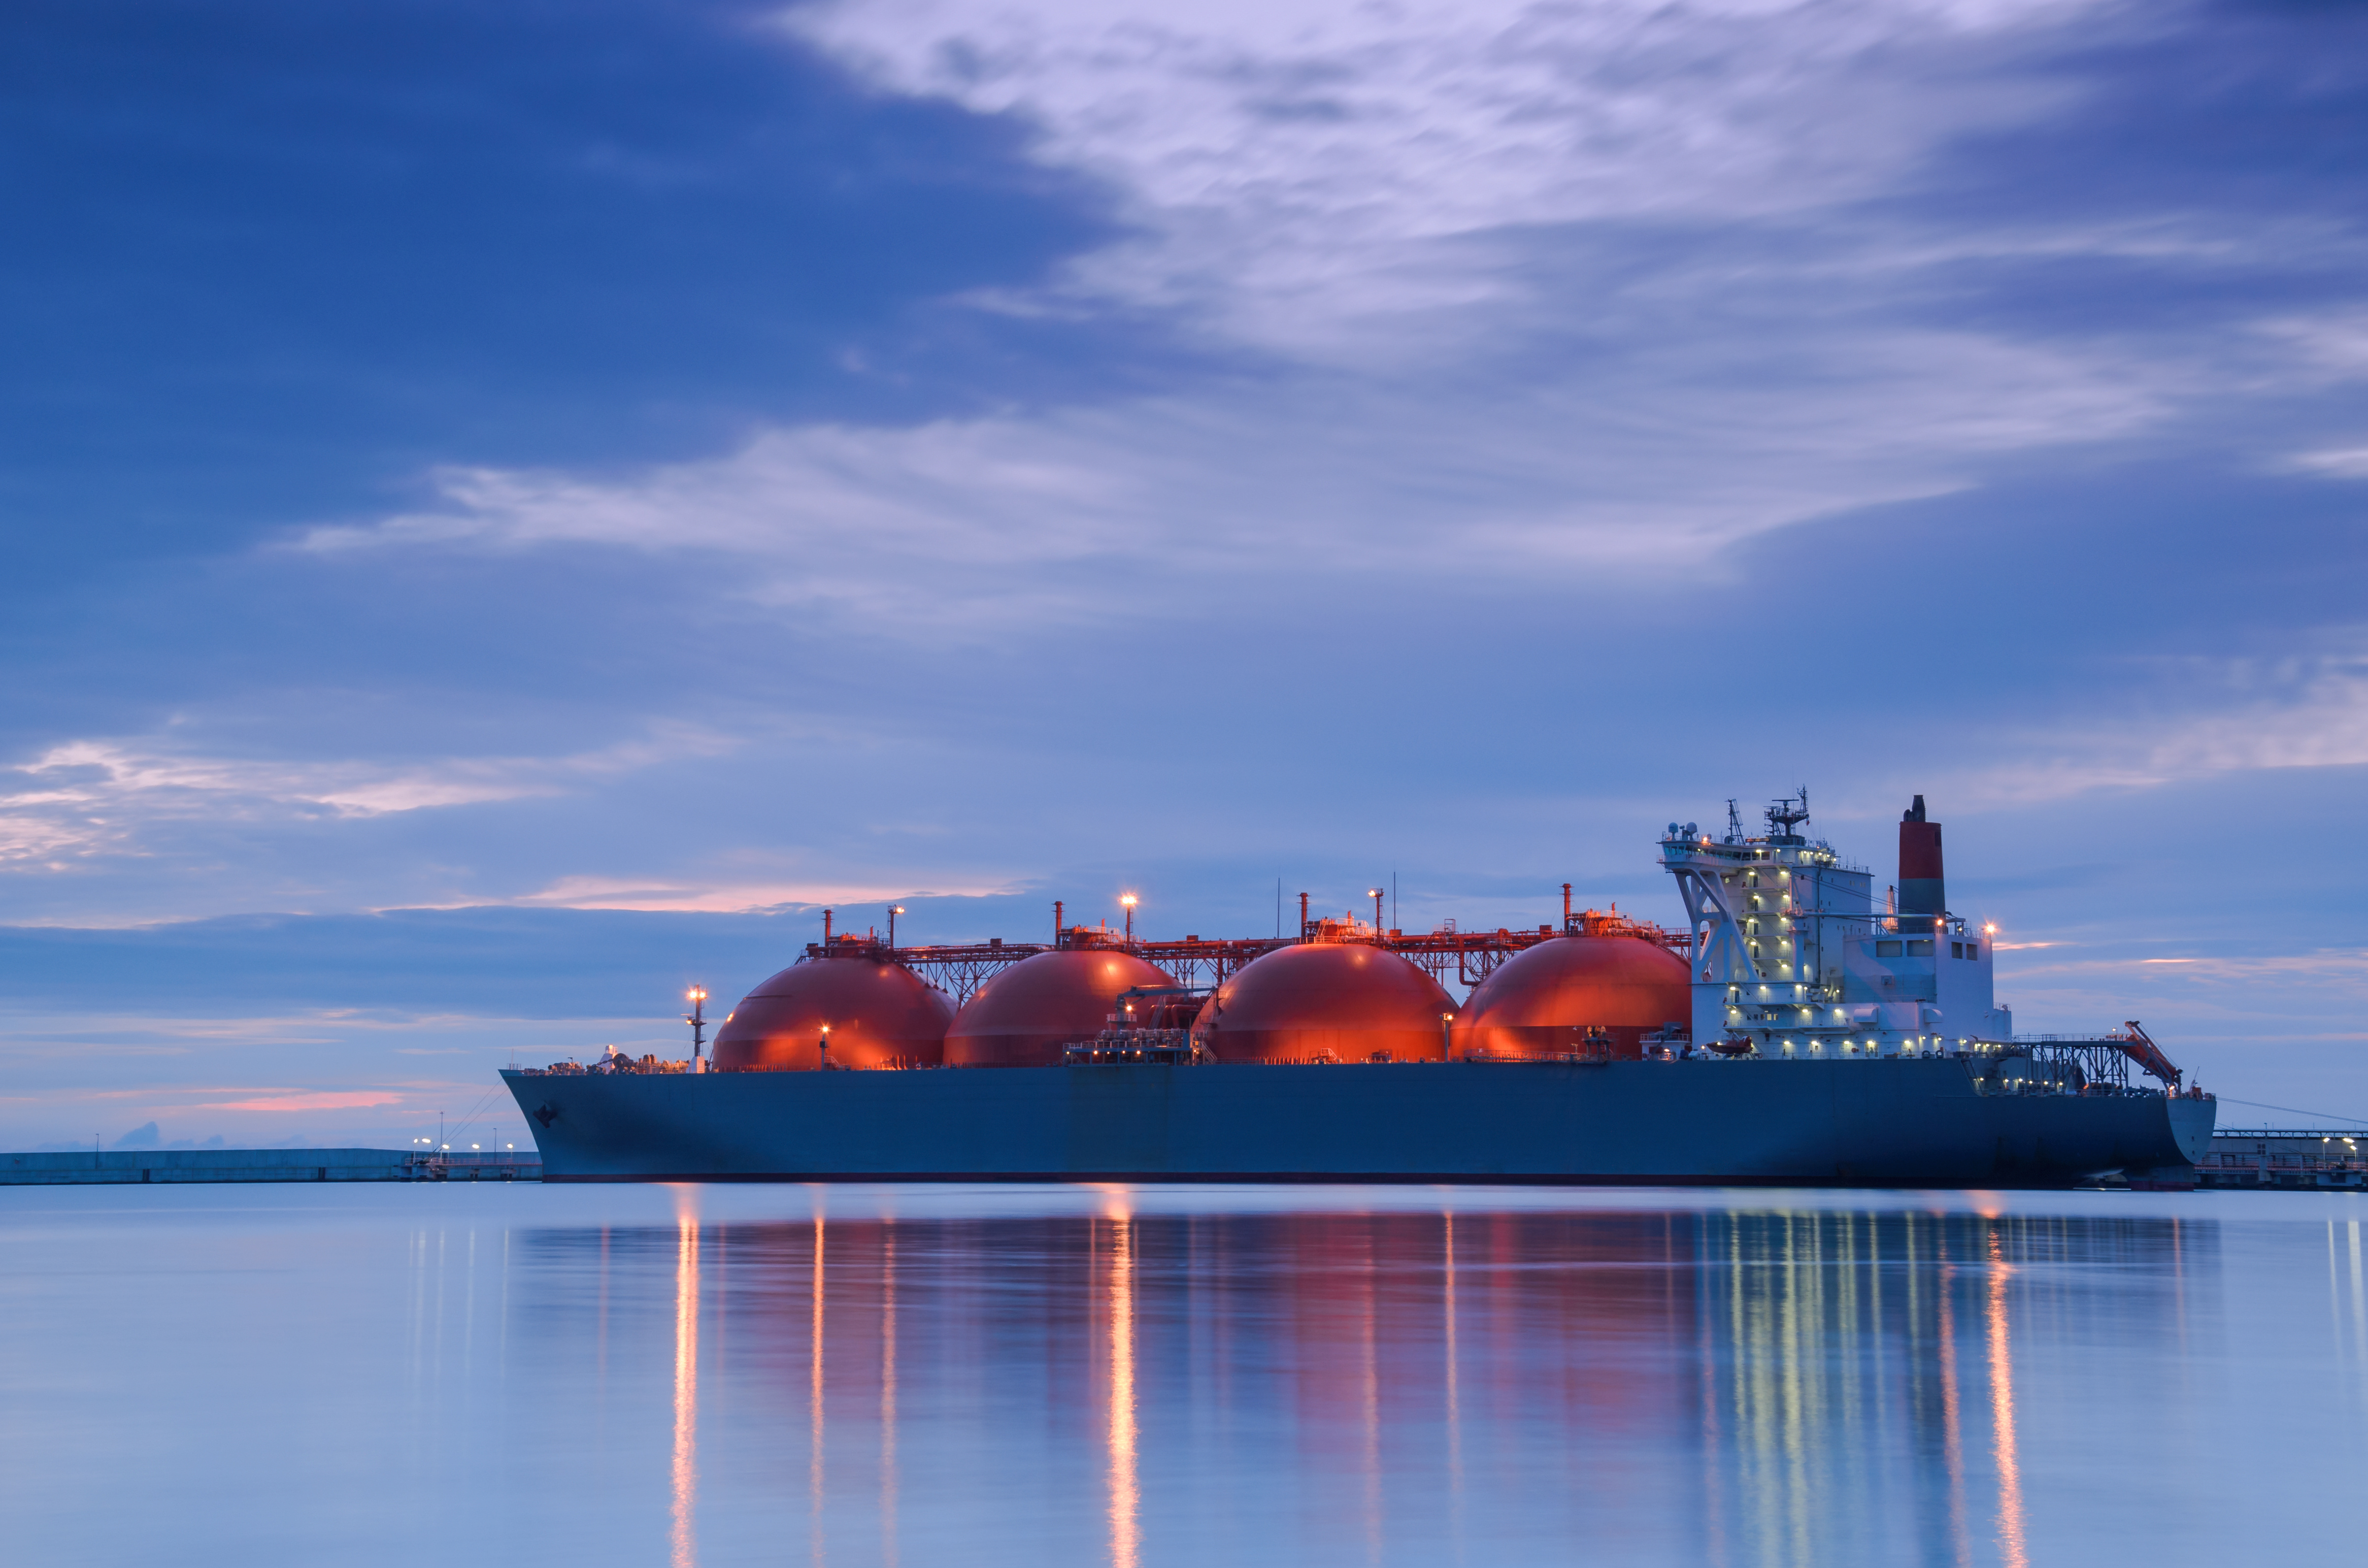 Liquid natural gas (LNG) tanker sails on smooth waters at dusk.